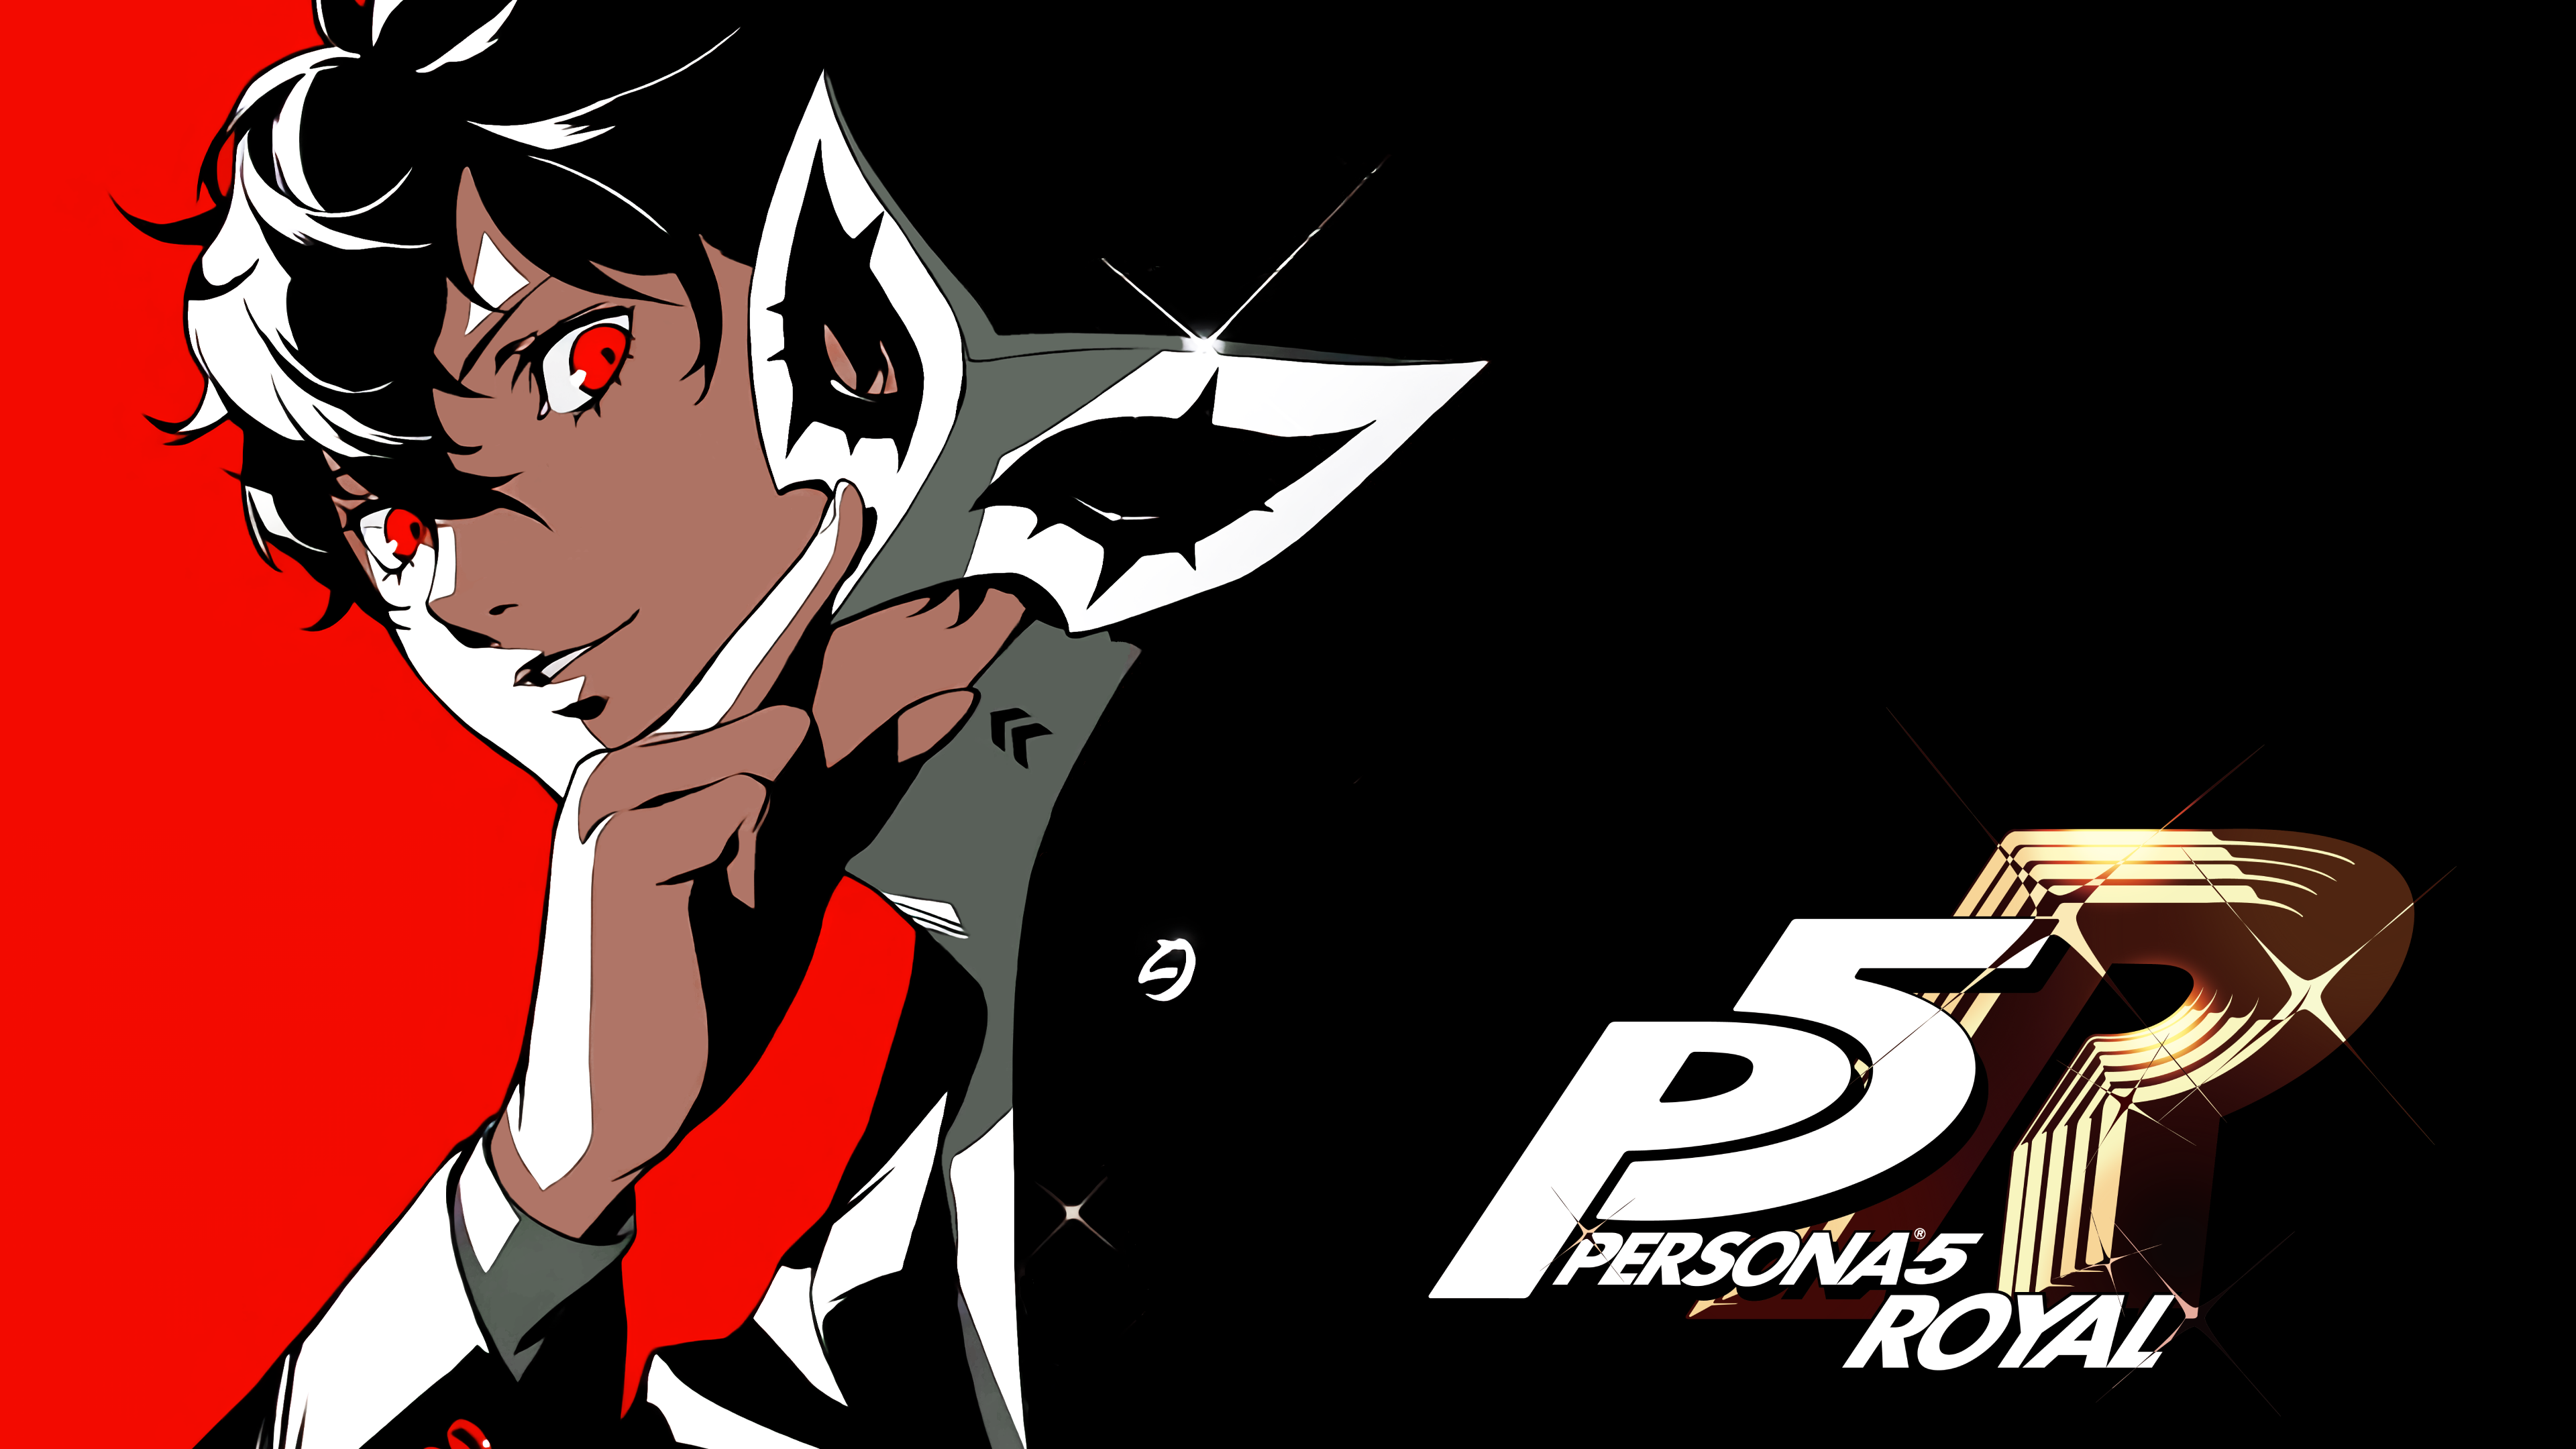 Persona 5's art style is abstract. 